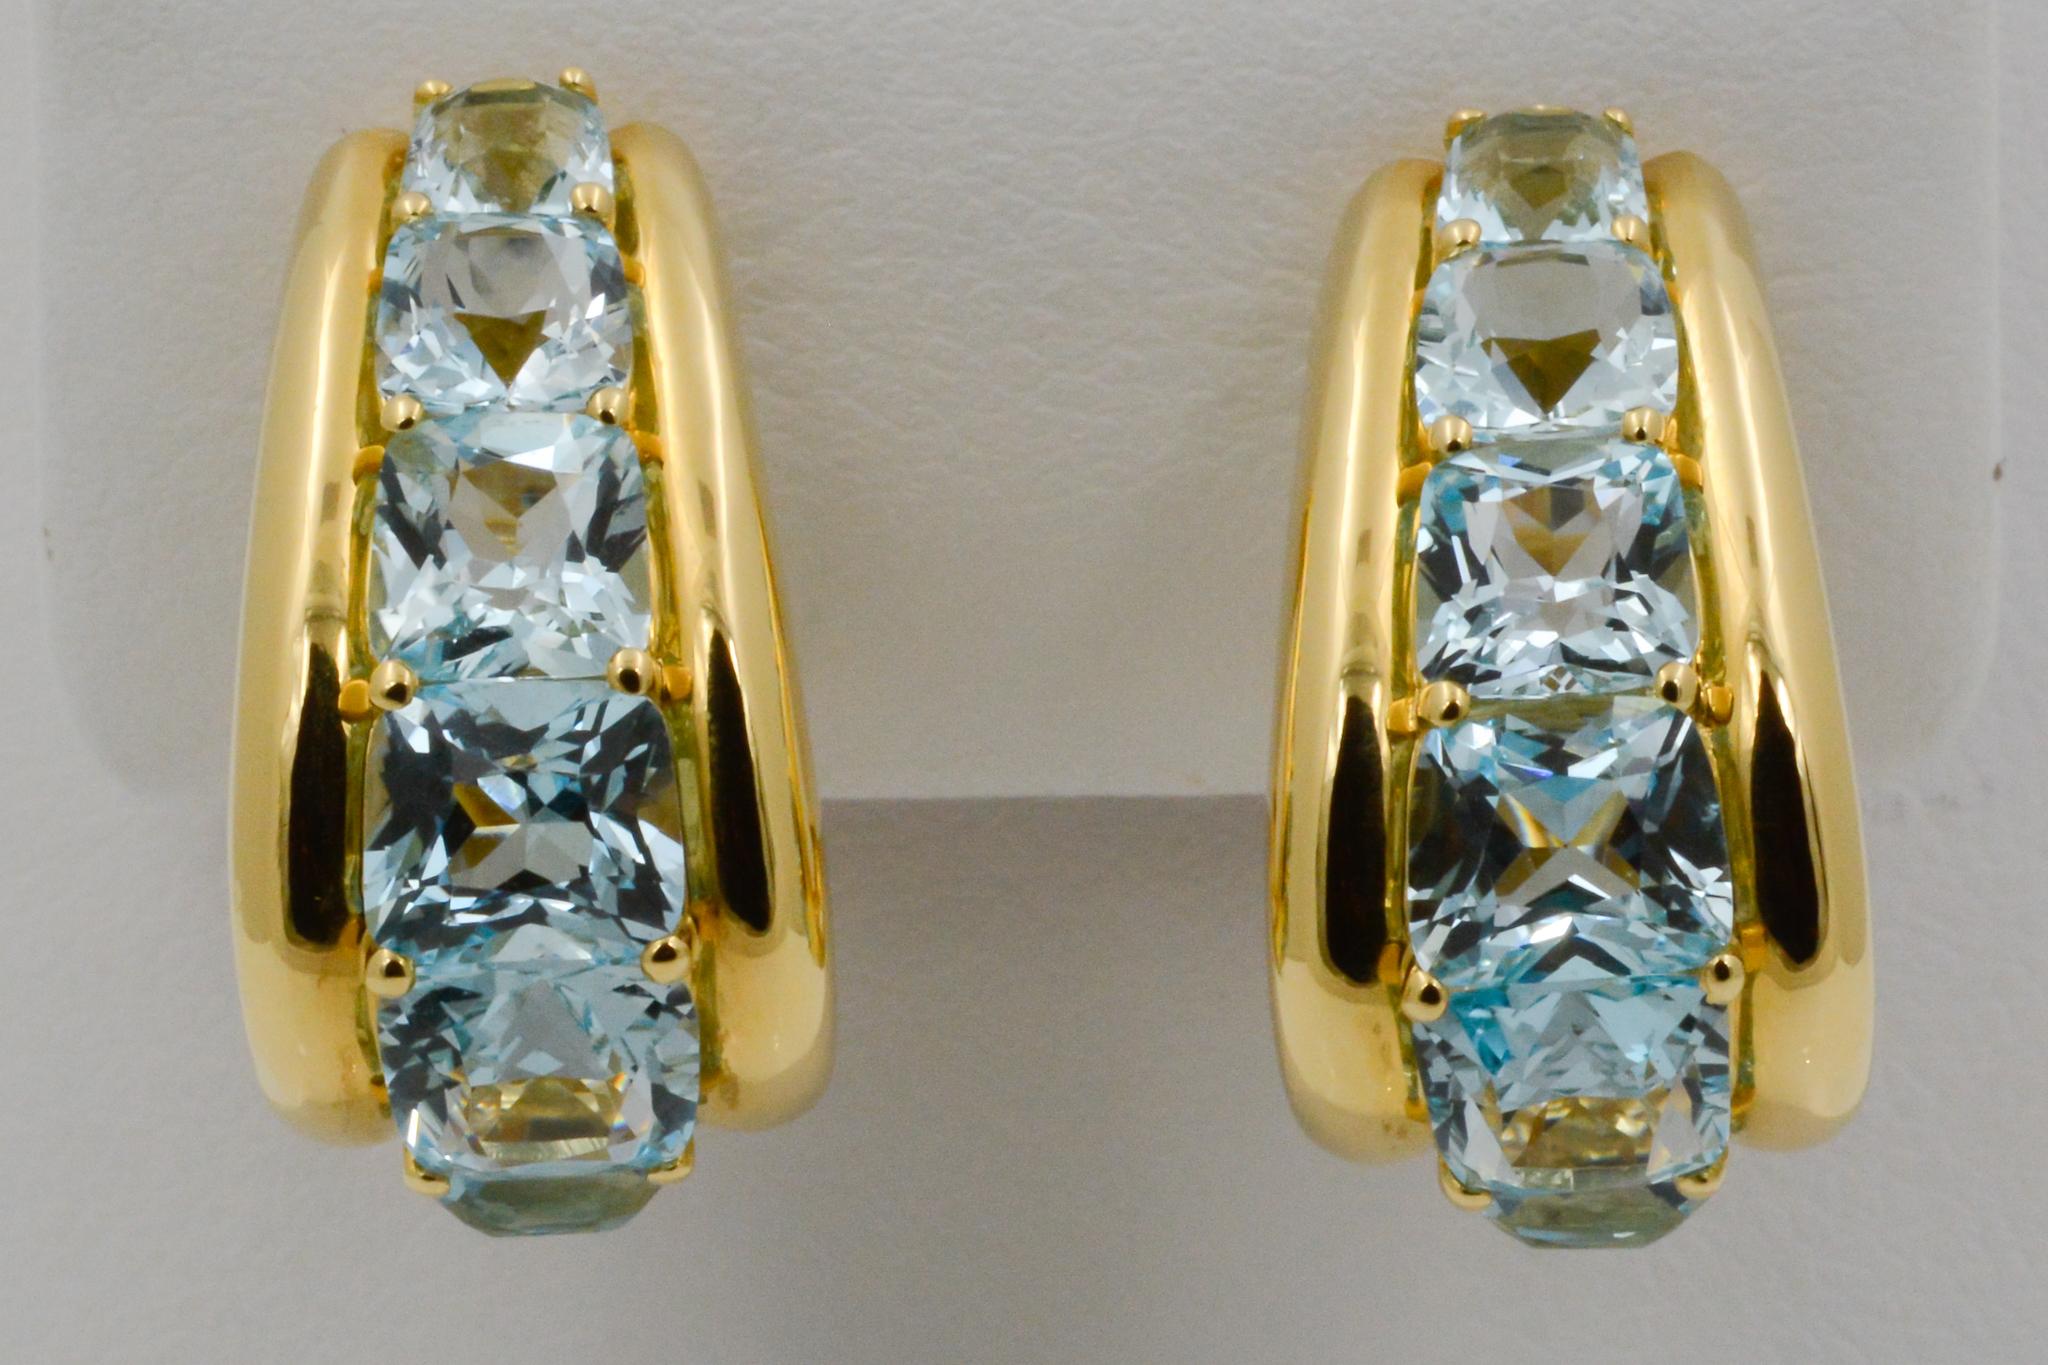 From Seaman Schepps, these 18k yellow gold Madison hoop earrings feature 14 blue topaz. The earrings have clip backs and are signed Seaman Schepps.